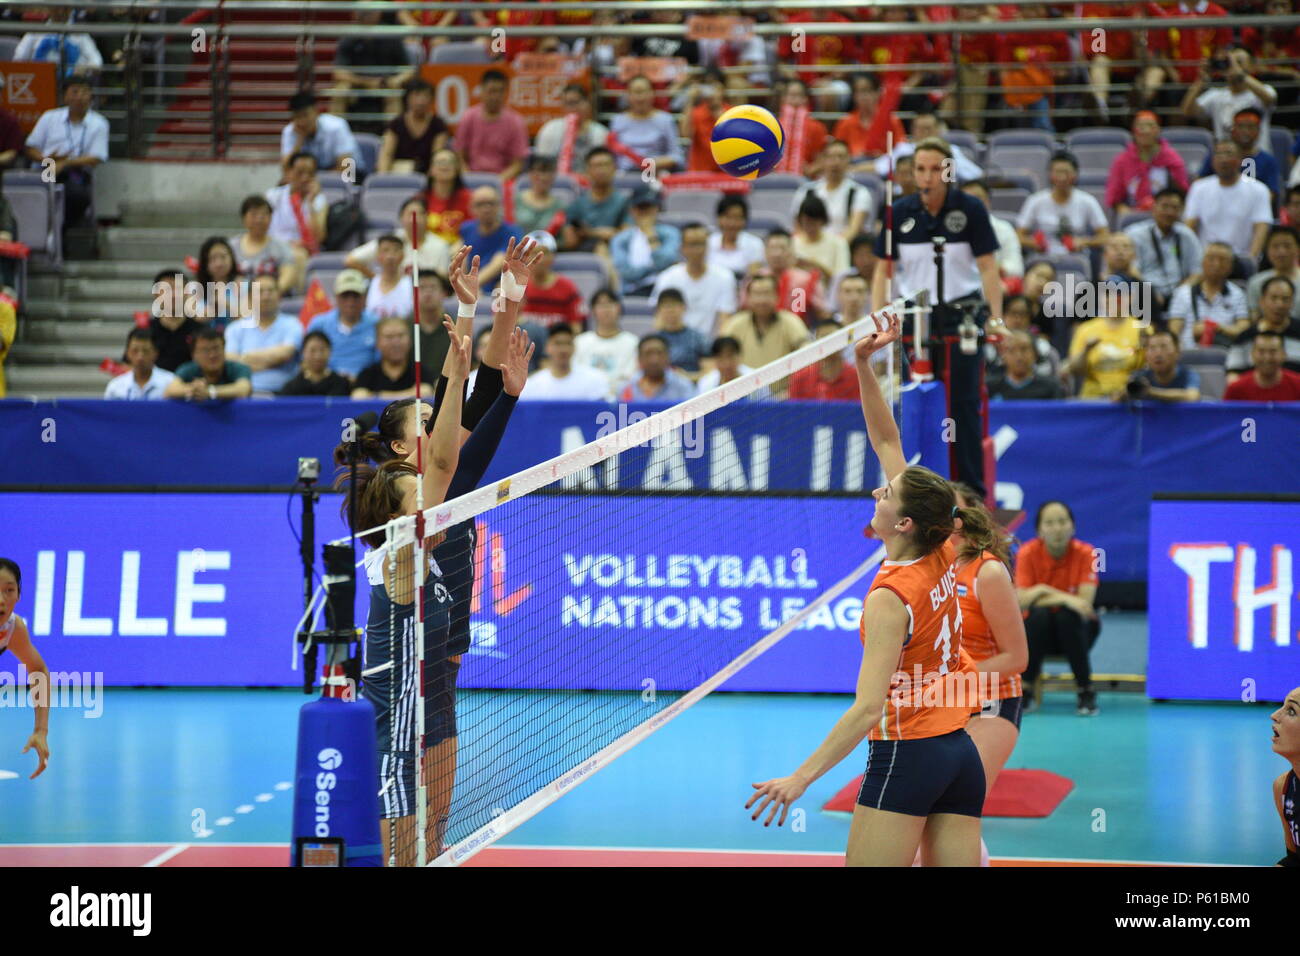 Fivb volleyball nations league hi-res stock photography and images - Page 7 